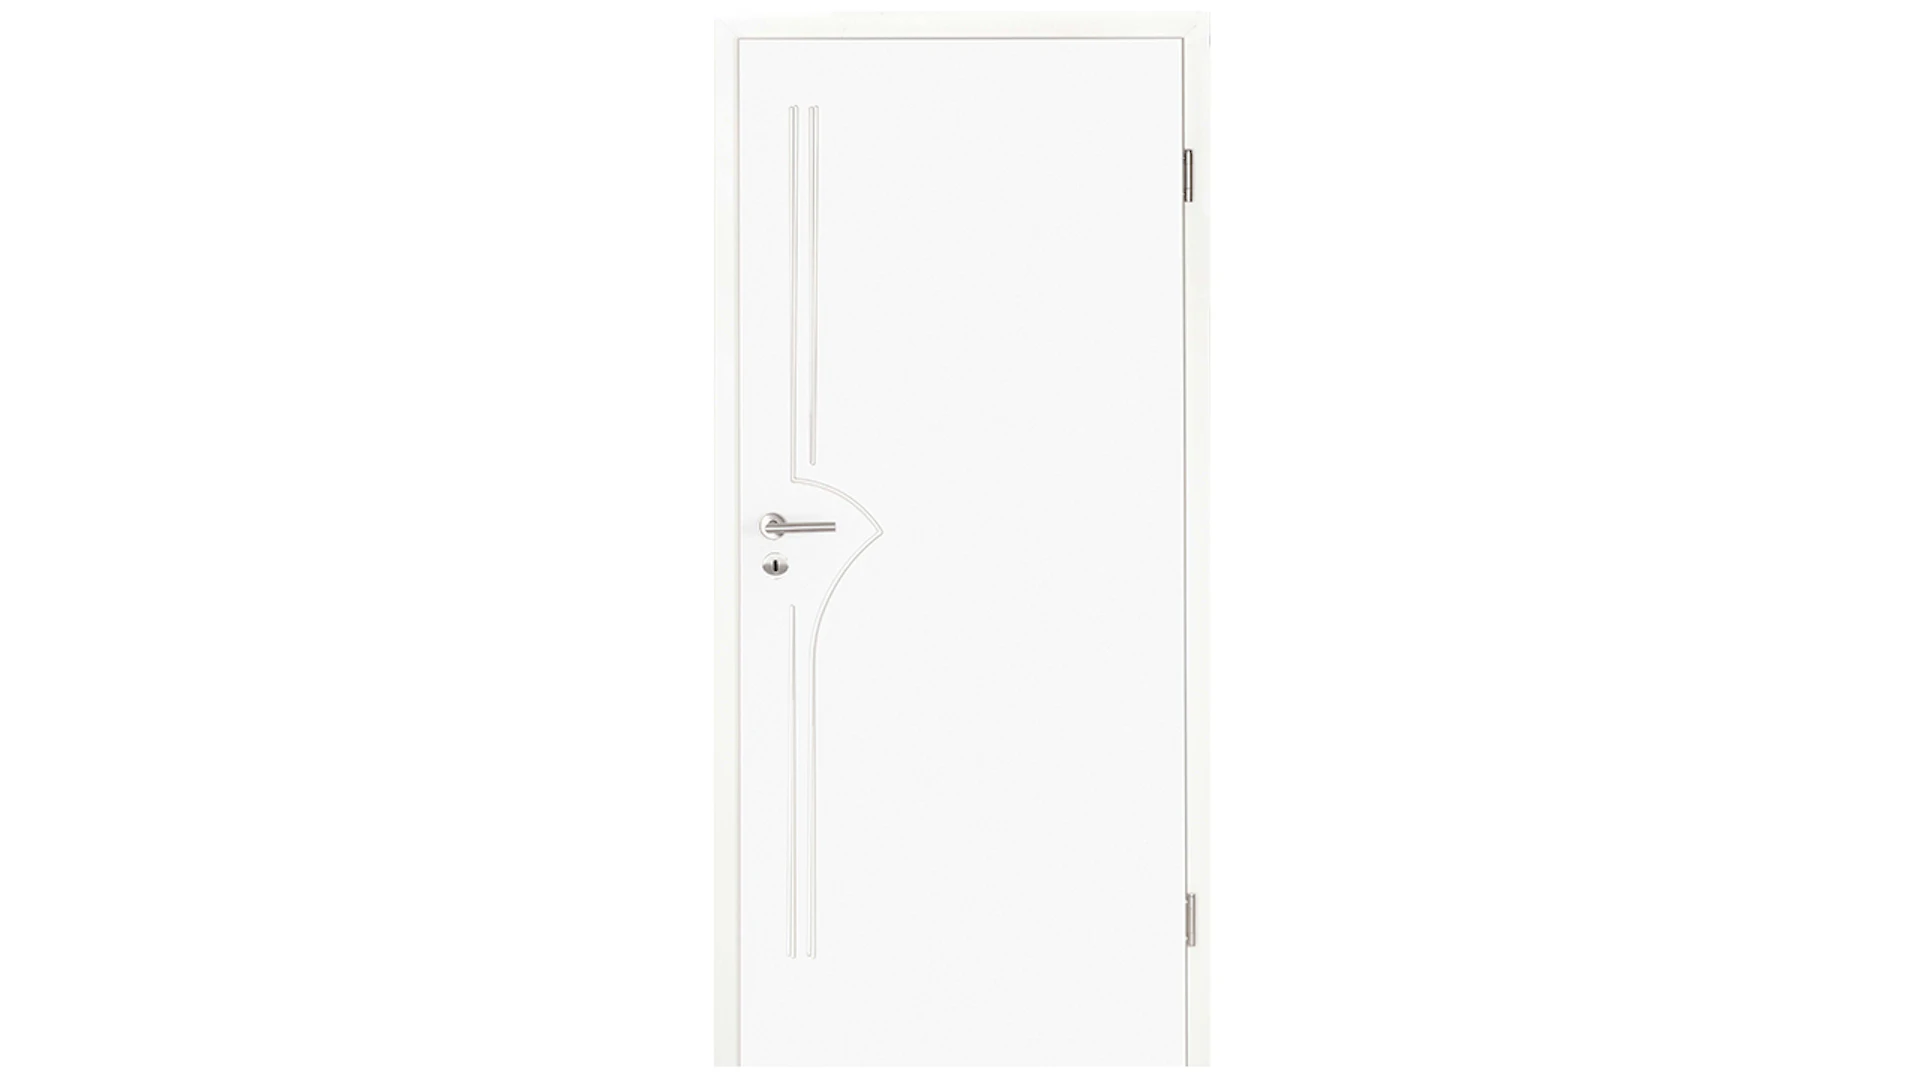 planeo interior door lacquer 2.0 - Kalle 9016 white lacquer 2110 x 985 mm DIN R - round RSP hinge 3-t